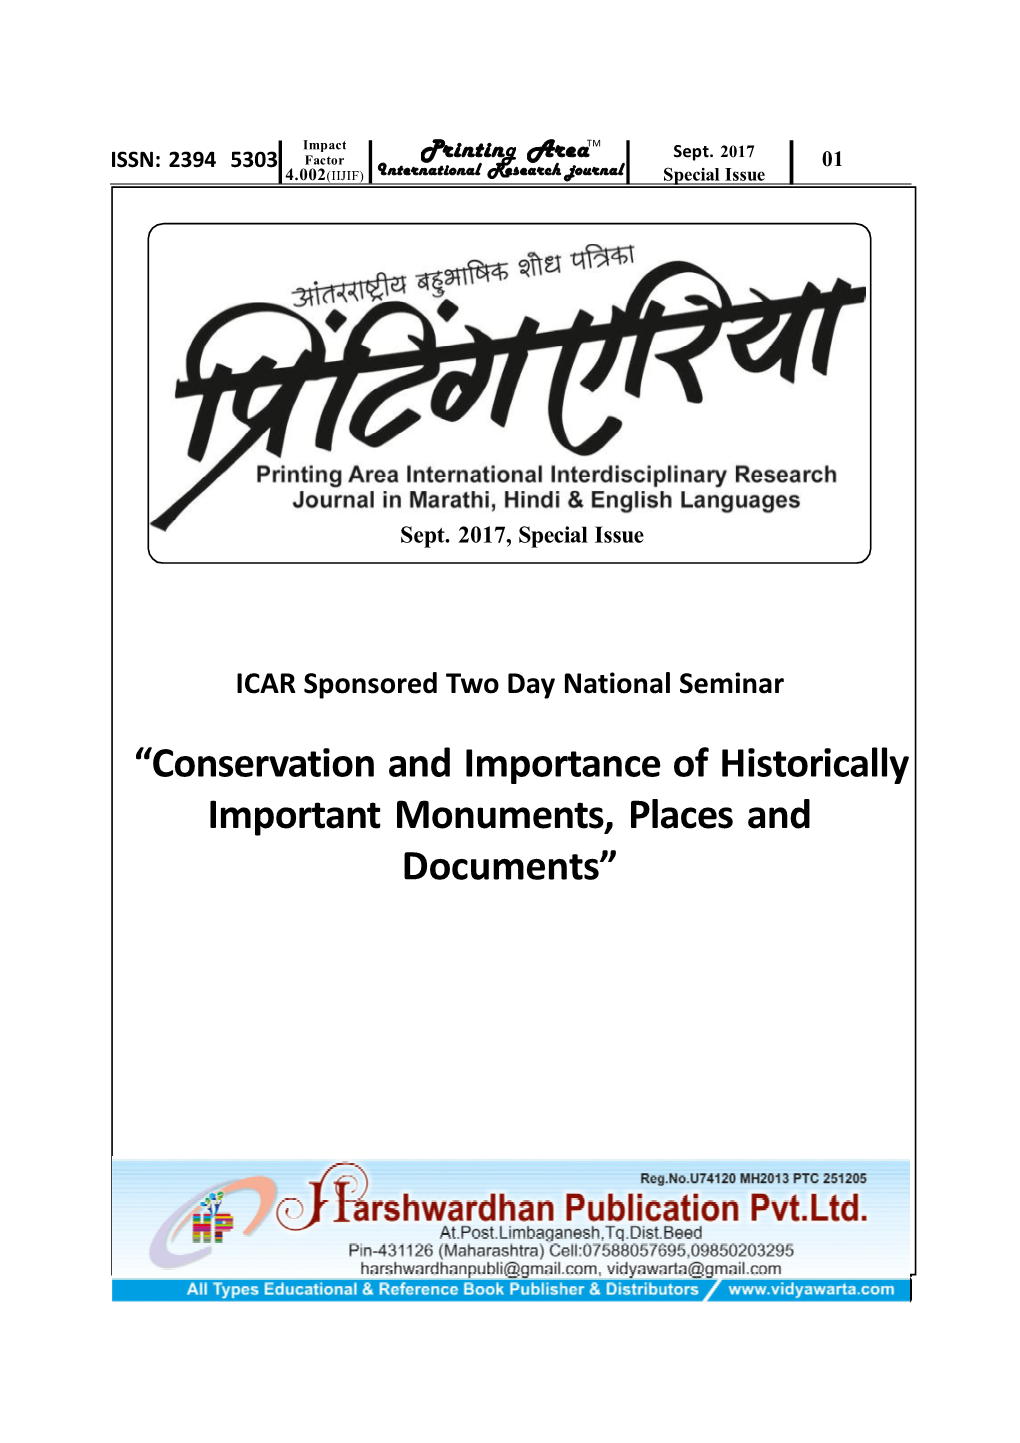 “Conservation and Importance of Historically Important Monuments, Places and Documents”